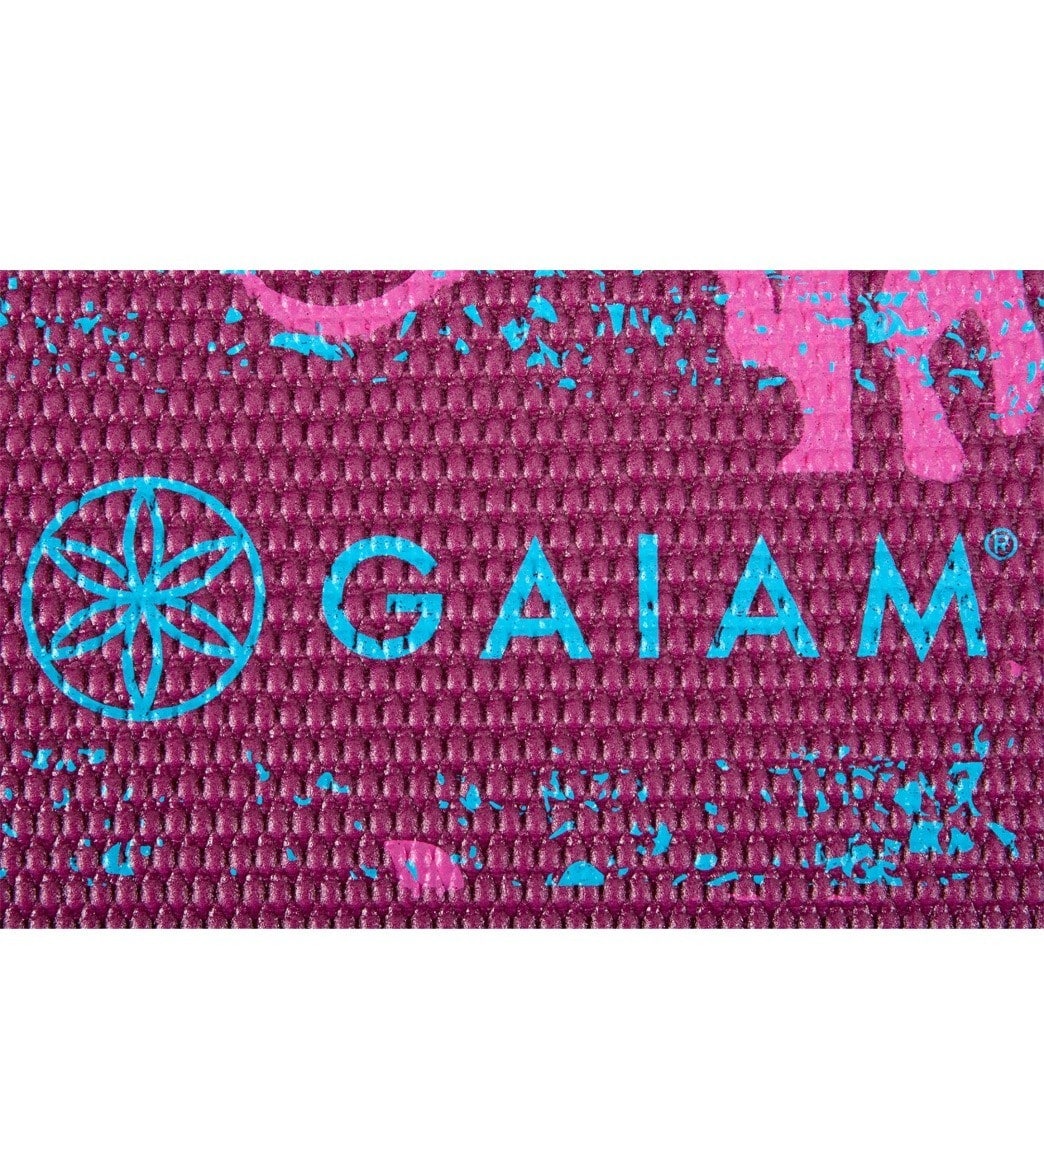 Gaiam Reversible Be Free Printed Yoga Mat 68 6mm Extra Thick at